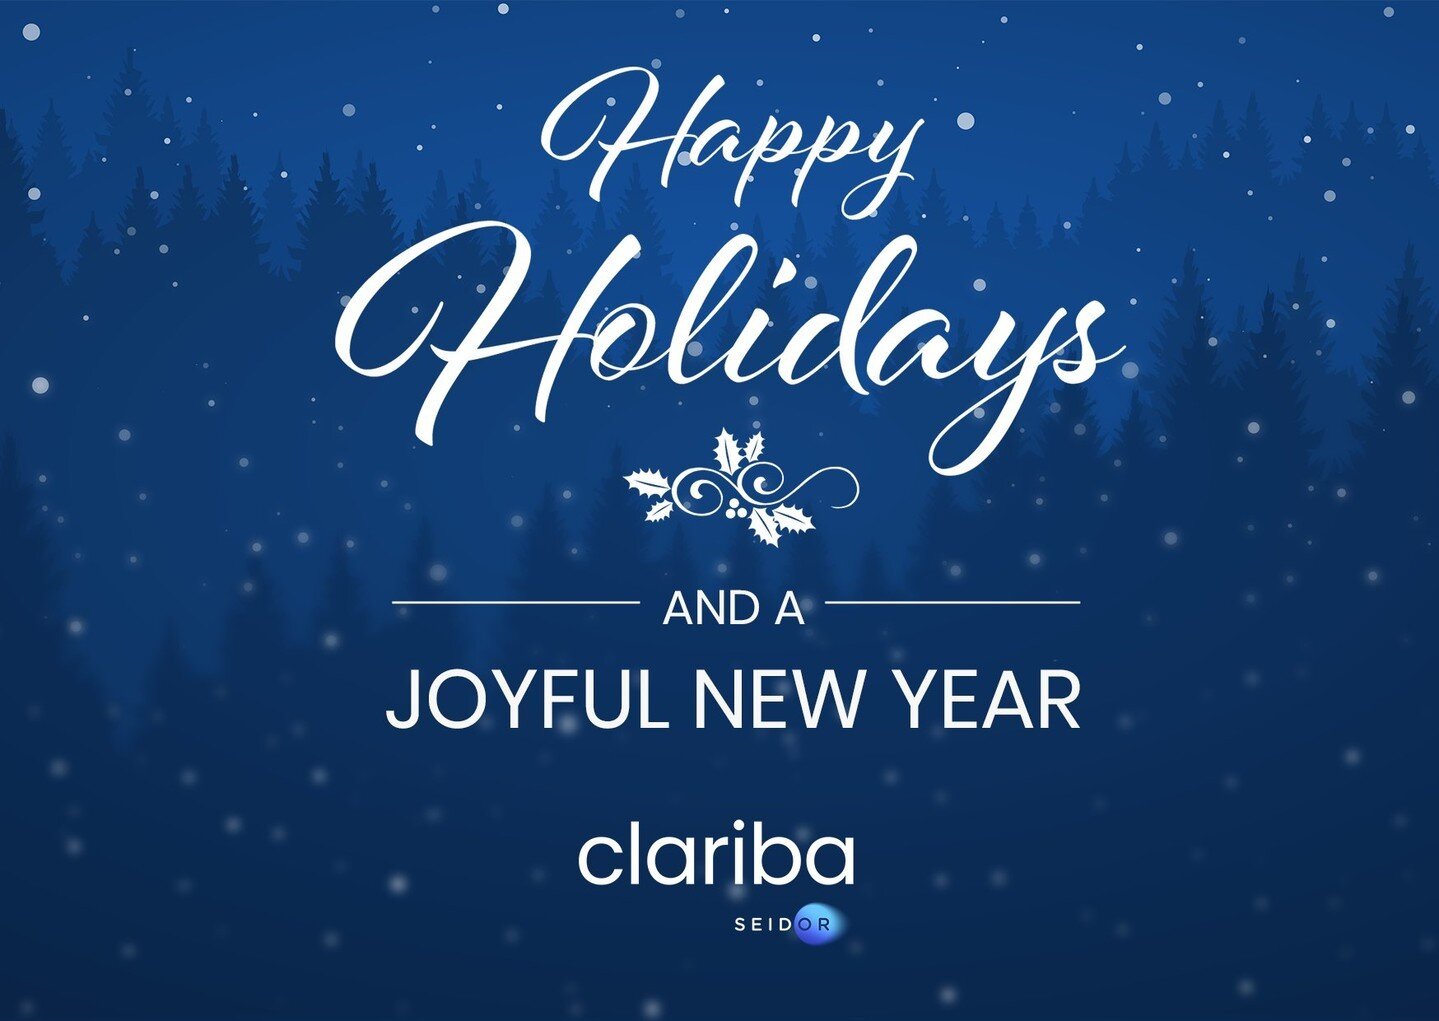 As the year comes to a close and everyone prepares to enjoy the holiday season, the Clariba SEIDOR Team would like to take this opportunity to send our warmest greetings to you. We wish you and your loved ones a very Happy Holiday season filled with 